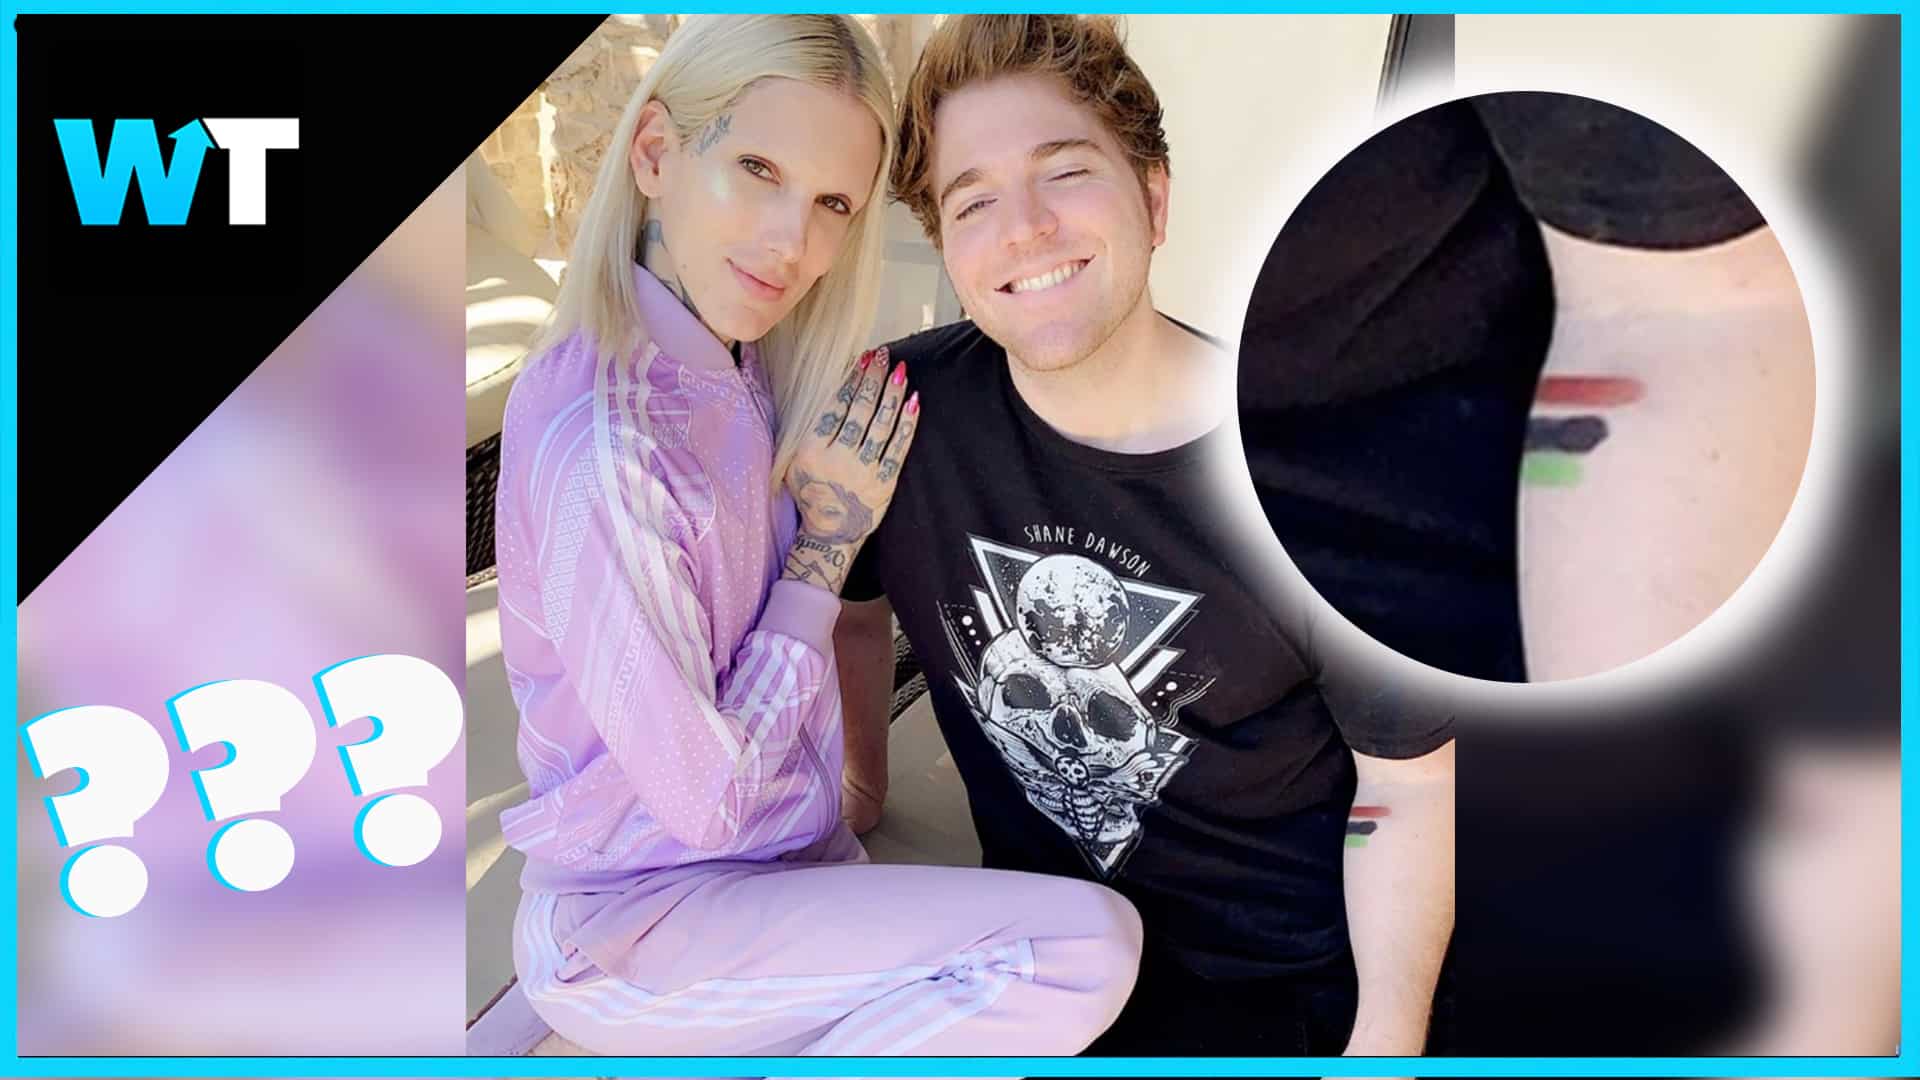 While the beauty world has been up in arms, Shane Dawson has been quietly s...